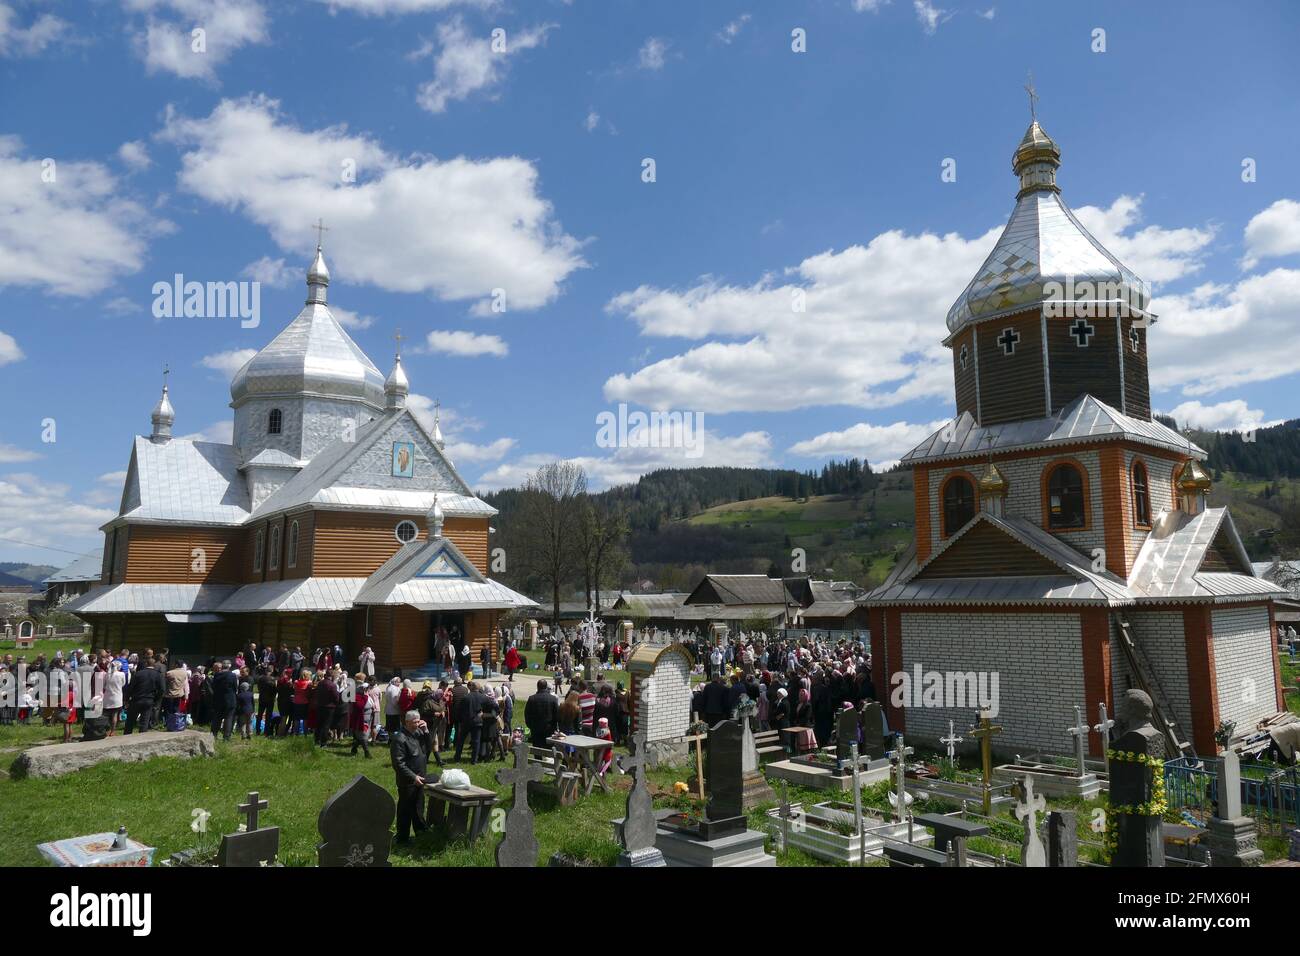 CHEREMOSHNA, UKRAINE - MAY 9, 2021 - The Saint Michael's Church of the Orthodox Church of Ukraine is pictured on the first Sunday after Easter when pe Stock Photo